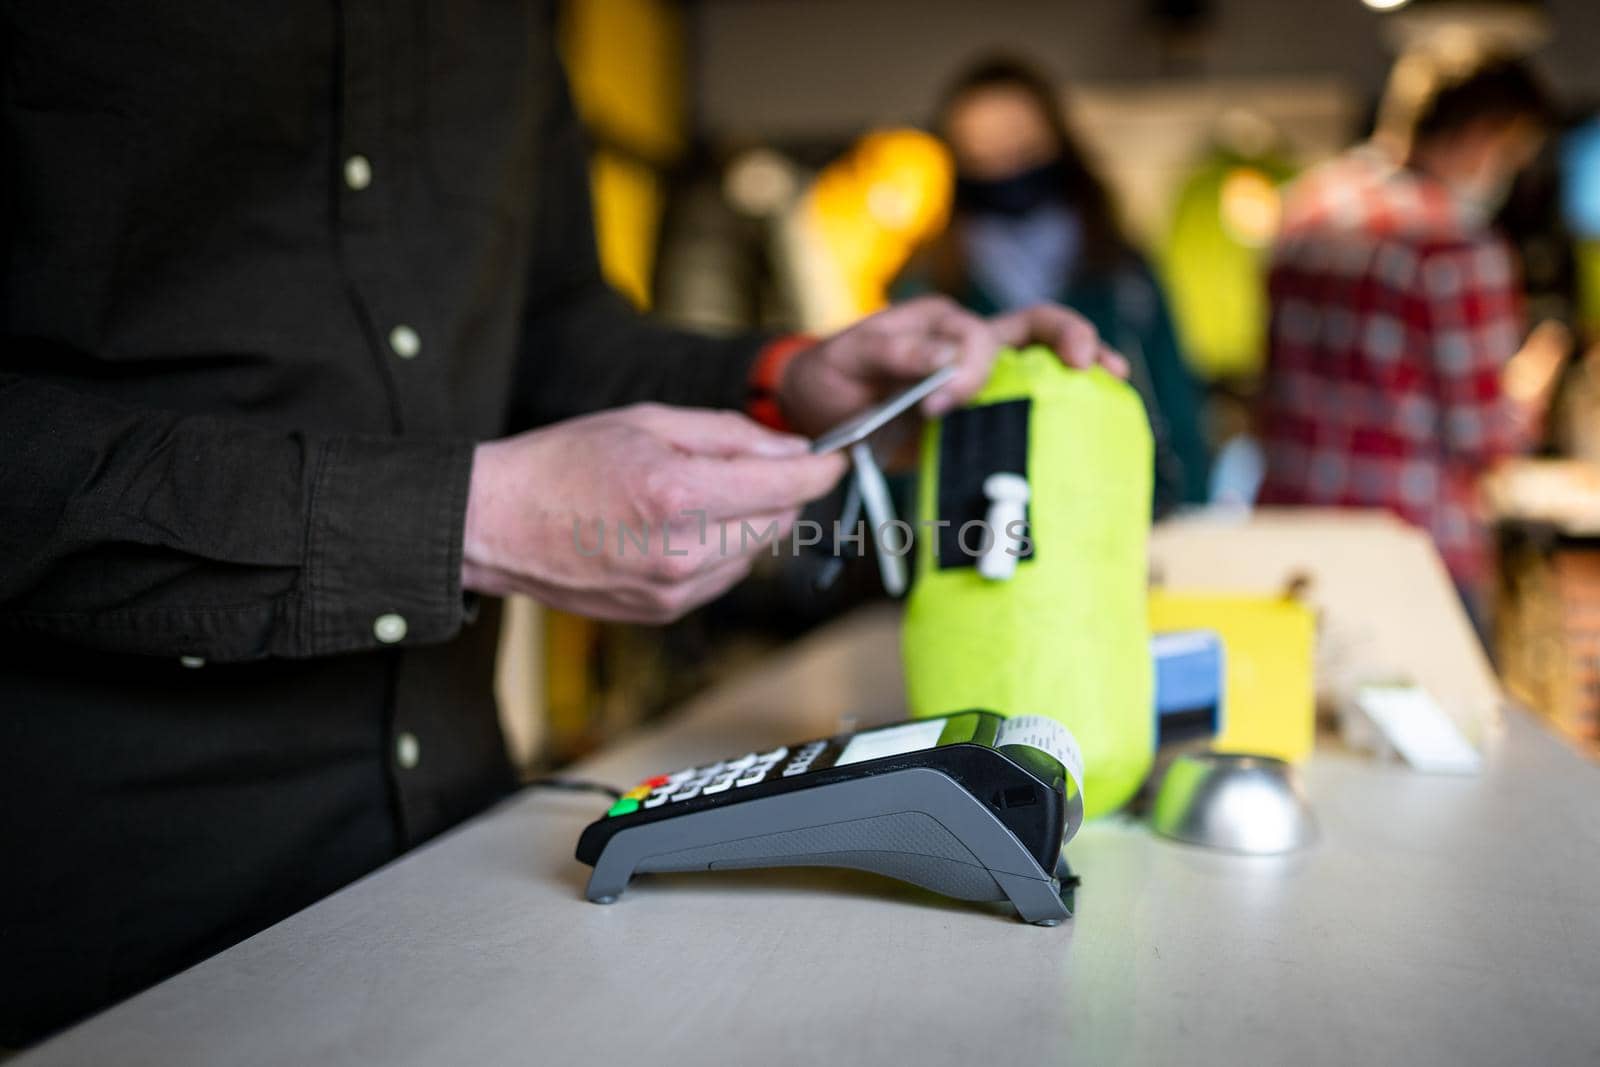 Man holds payment terminal while holding receipt for completing a purchase. Hands close up and side view. Concept of NFC, business and banking transaction. Close up of payment device, card machine.